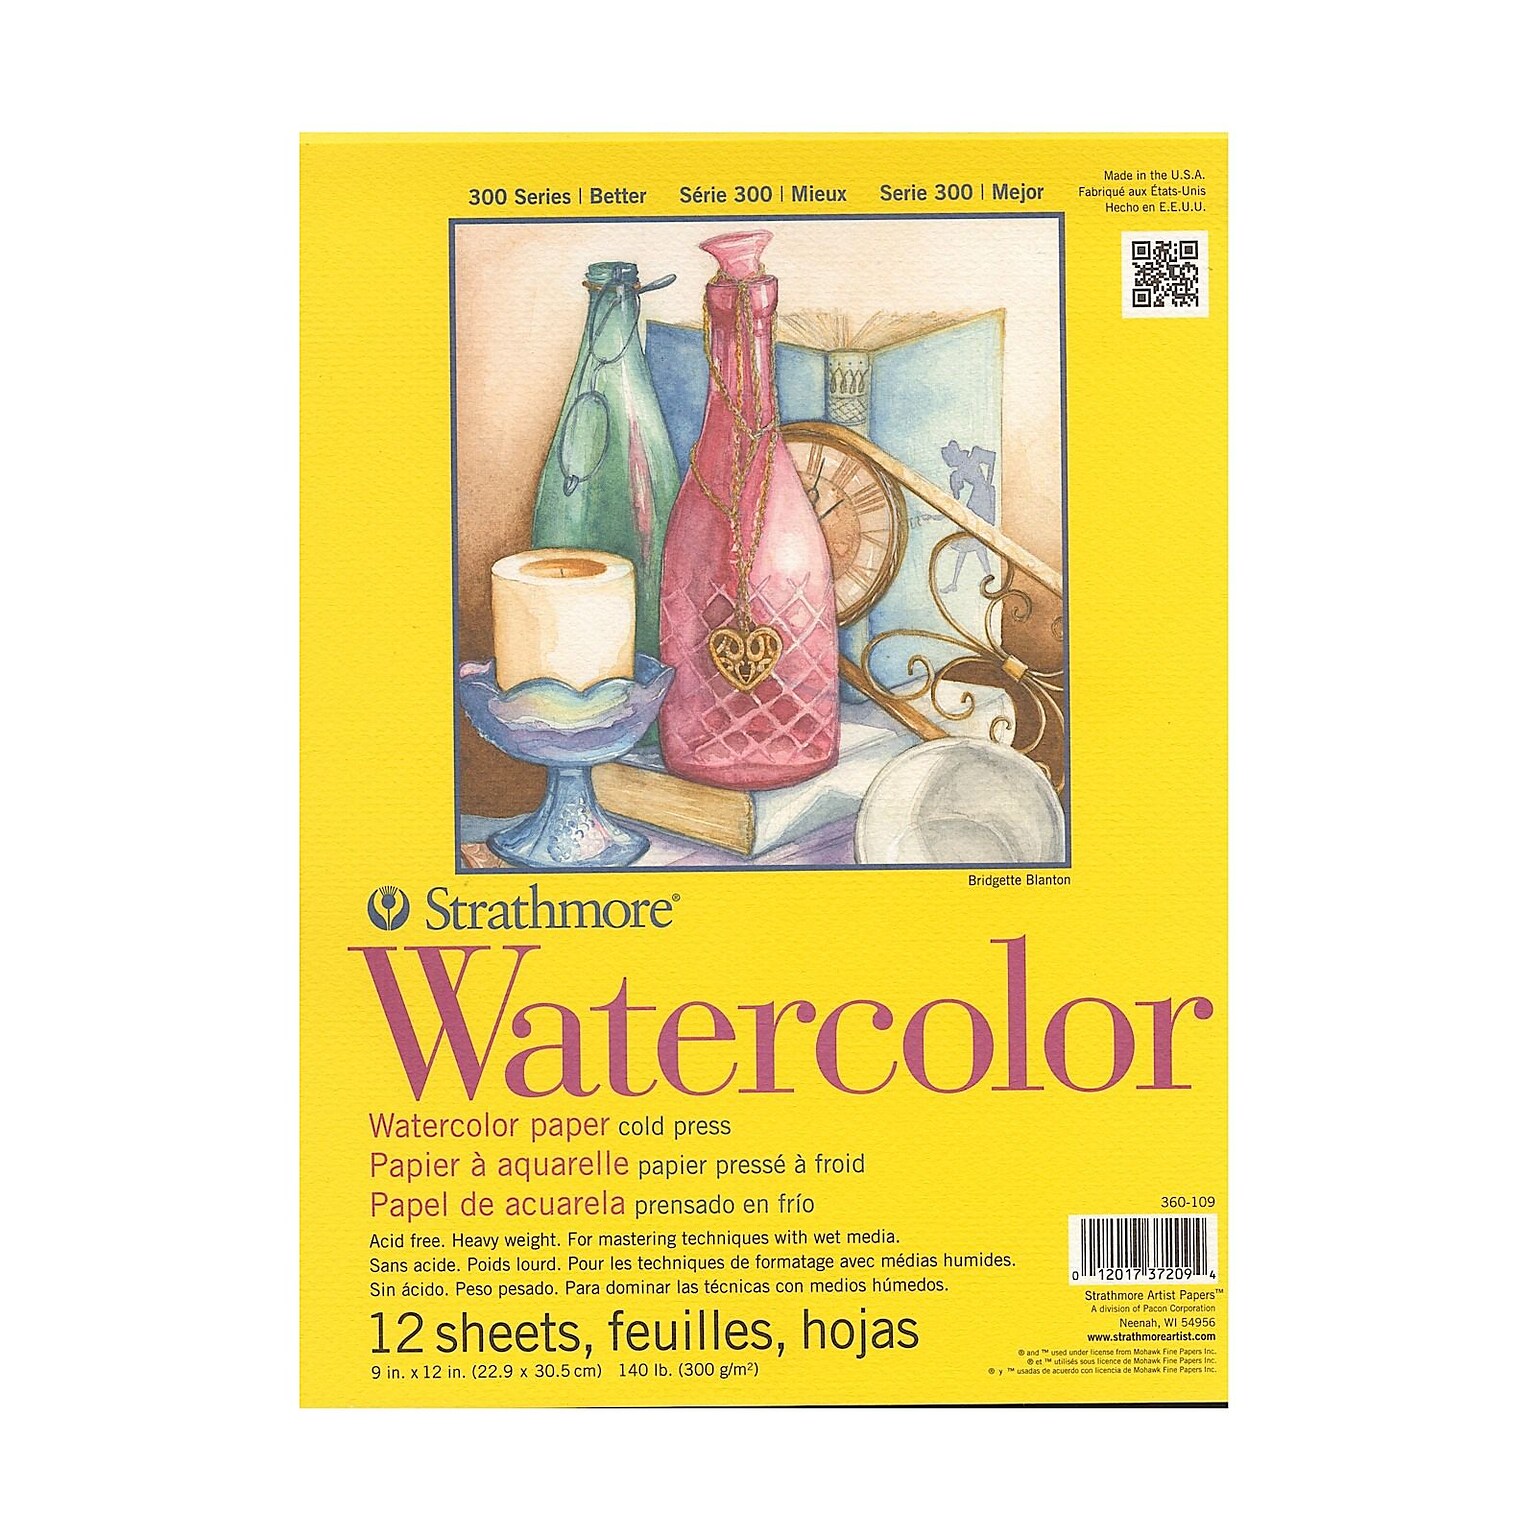 Strathmore 300 Series Watercolor Paper 9 In. X 12 In. Pad Of 12 Tape Bound [Pack Of 2] (2PK-360-109-1)